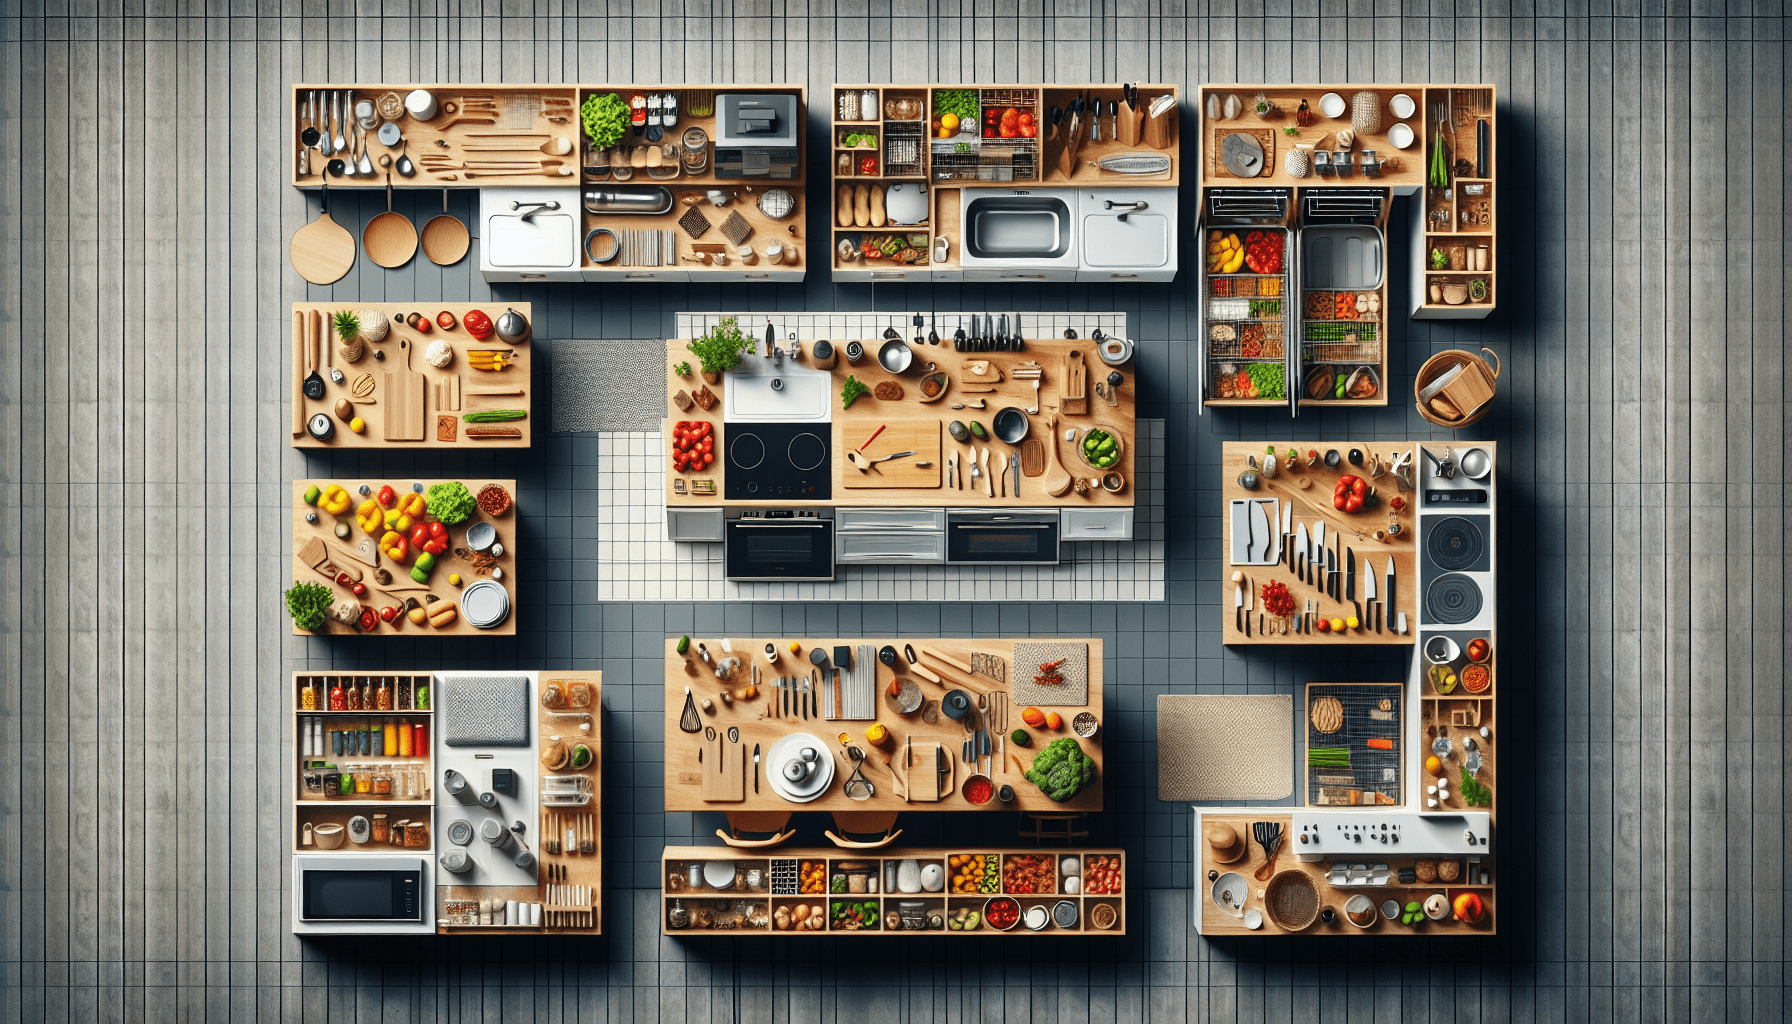 What Is The General Layout Of A Kitchen?